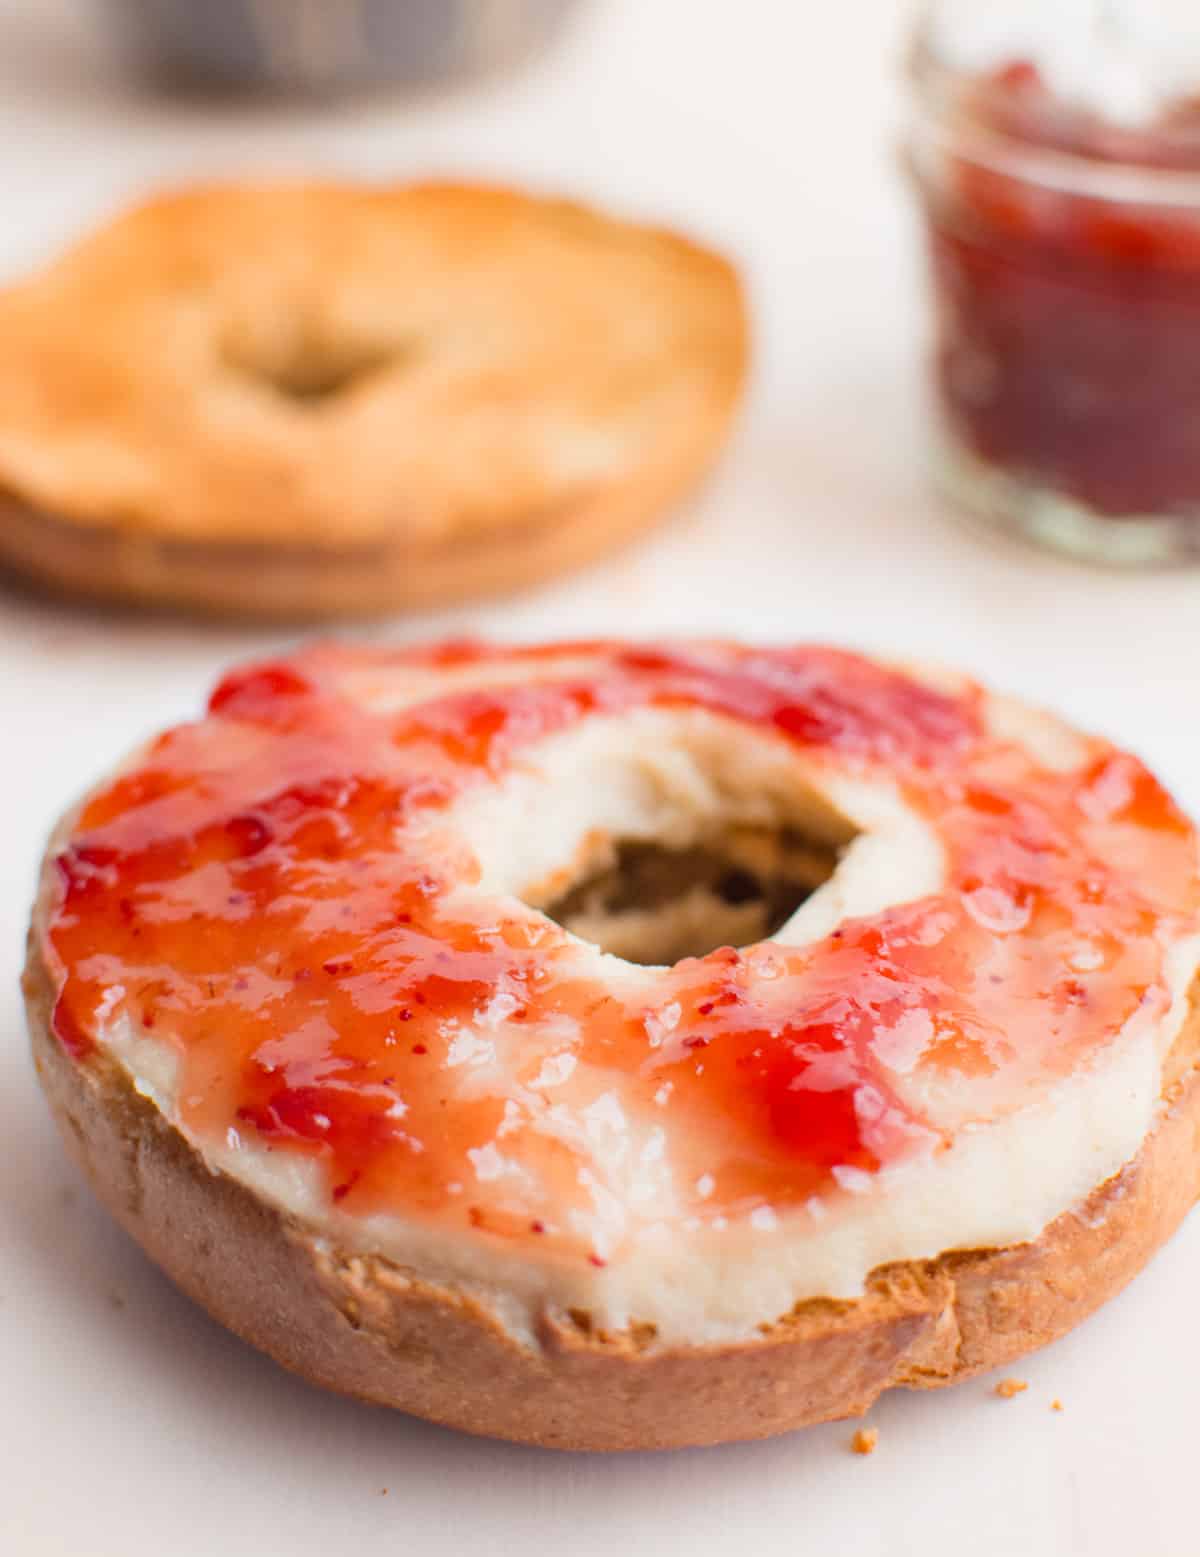 A toasted bagel spread with cashew cream cheese and strawberry preserves. There is a jar of preserves and other half of toasted bagel in the background.